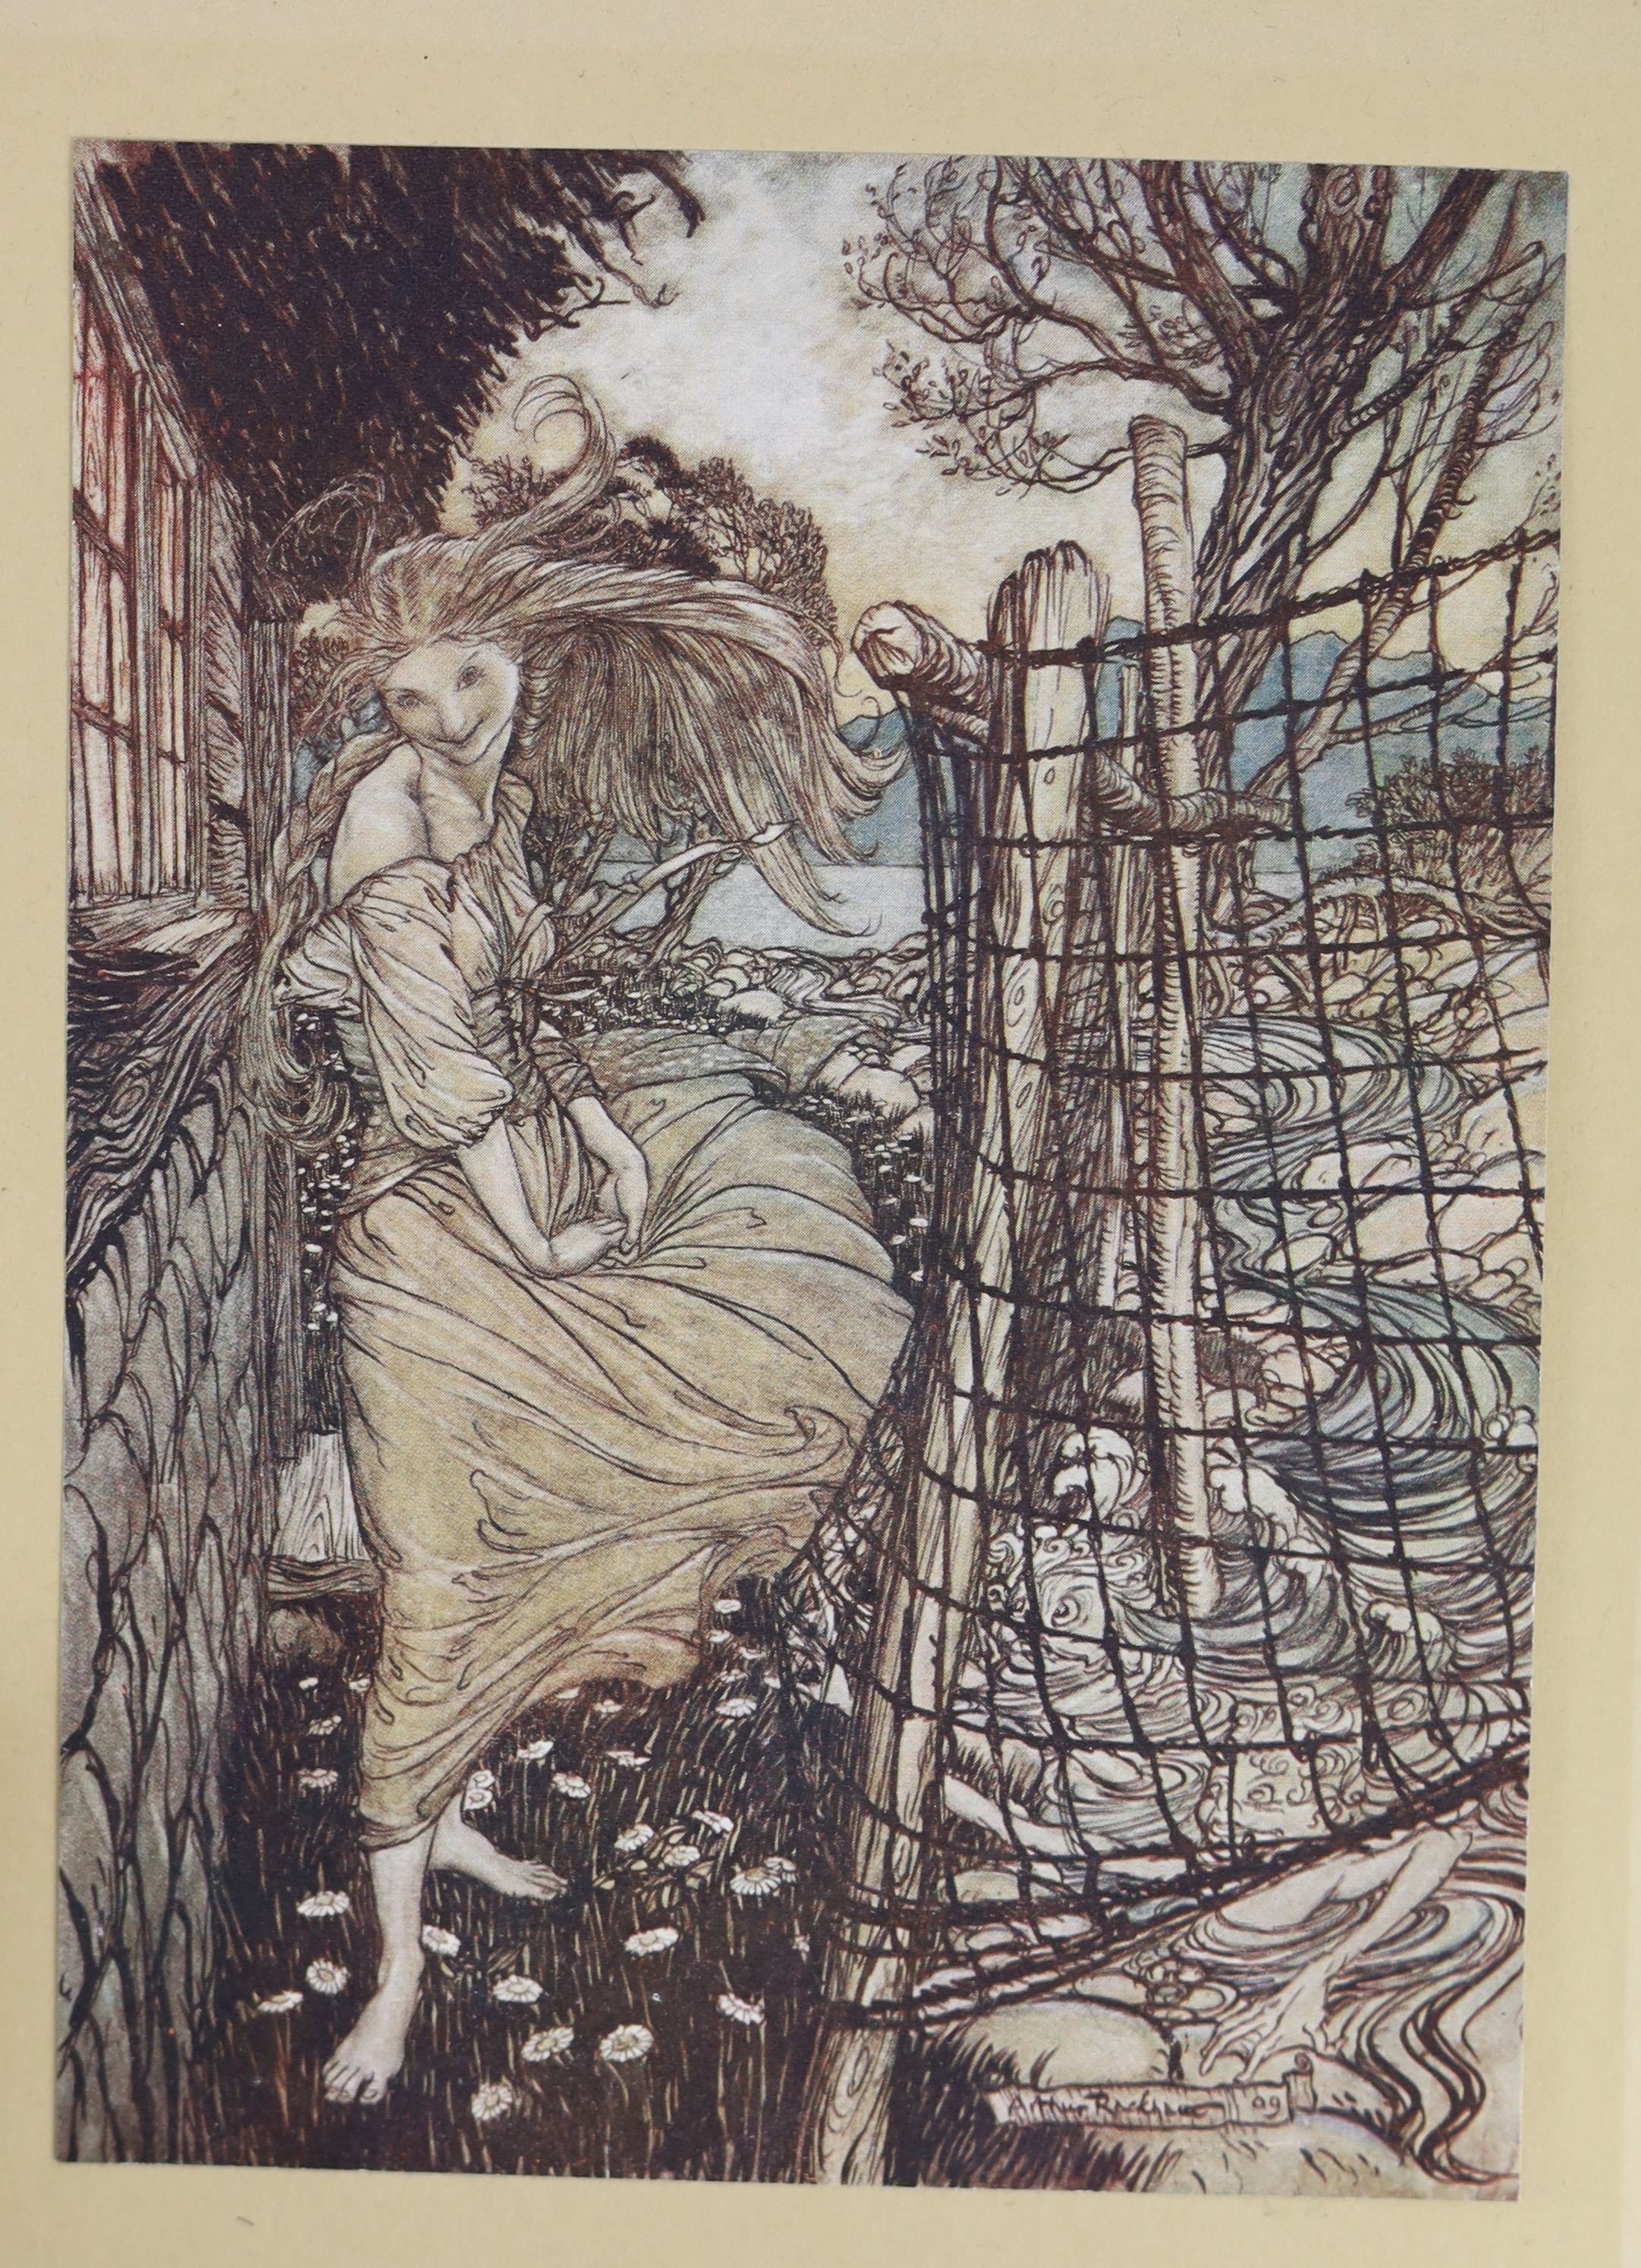 Rackham, Arthur (illustrator) - 4 works:- A Midsummer Night’s Dream, with 40 tipped-in colour plates, 1908, Book of Pictures, 1913; Undine, 1920 and Little Brother & Little Suster, 1917, all 4to, cloth bound.